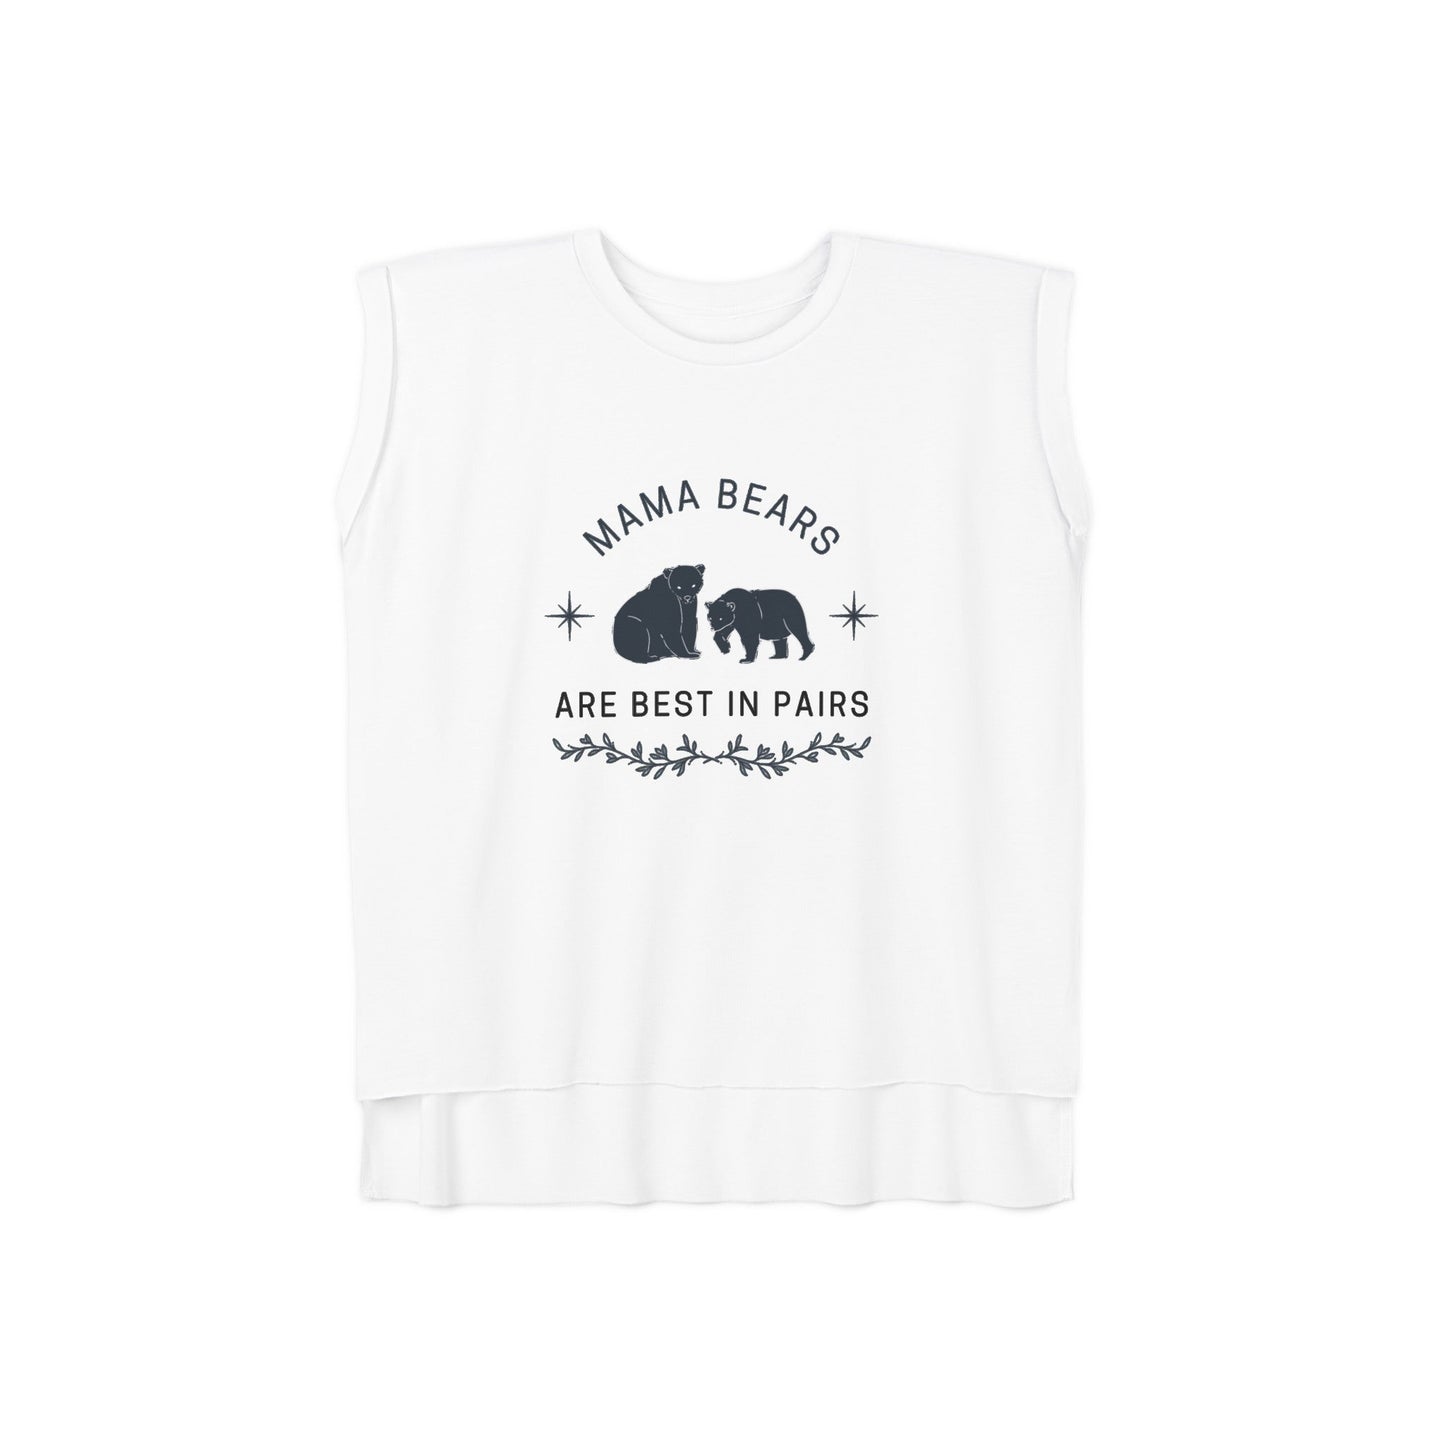 LGBT Pride "Mama Bears are Best in Pairs" Women’s Flowy Rolled Cuffs Muscle Tee | Mothers Day Lesbian Moms LGBTQ shirt